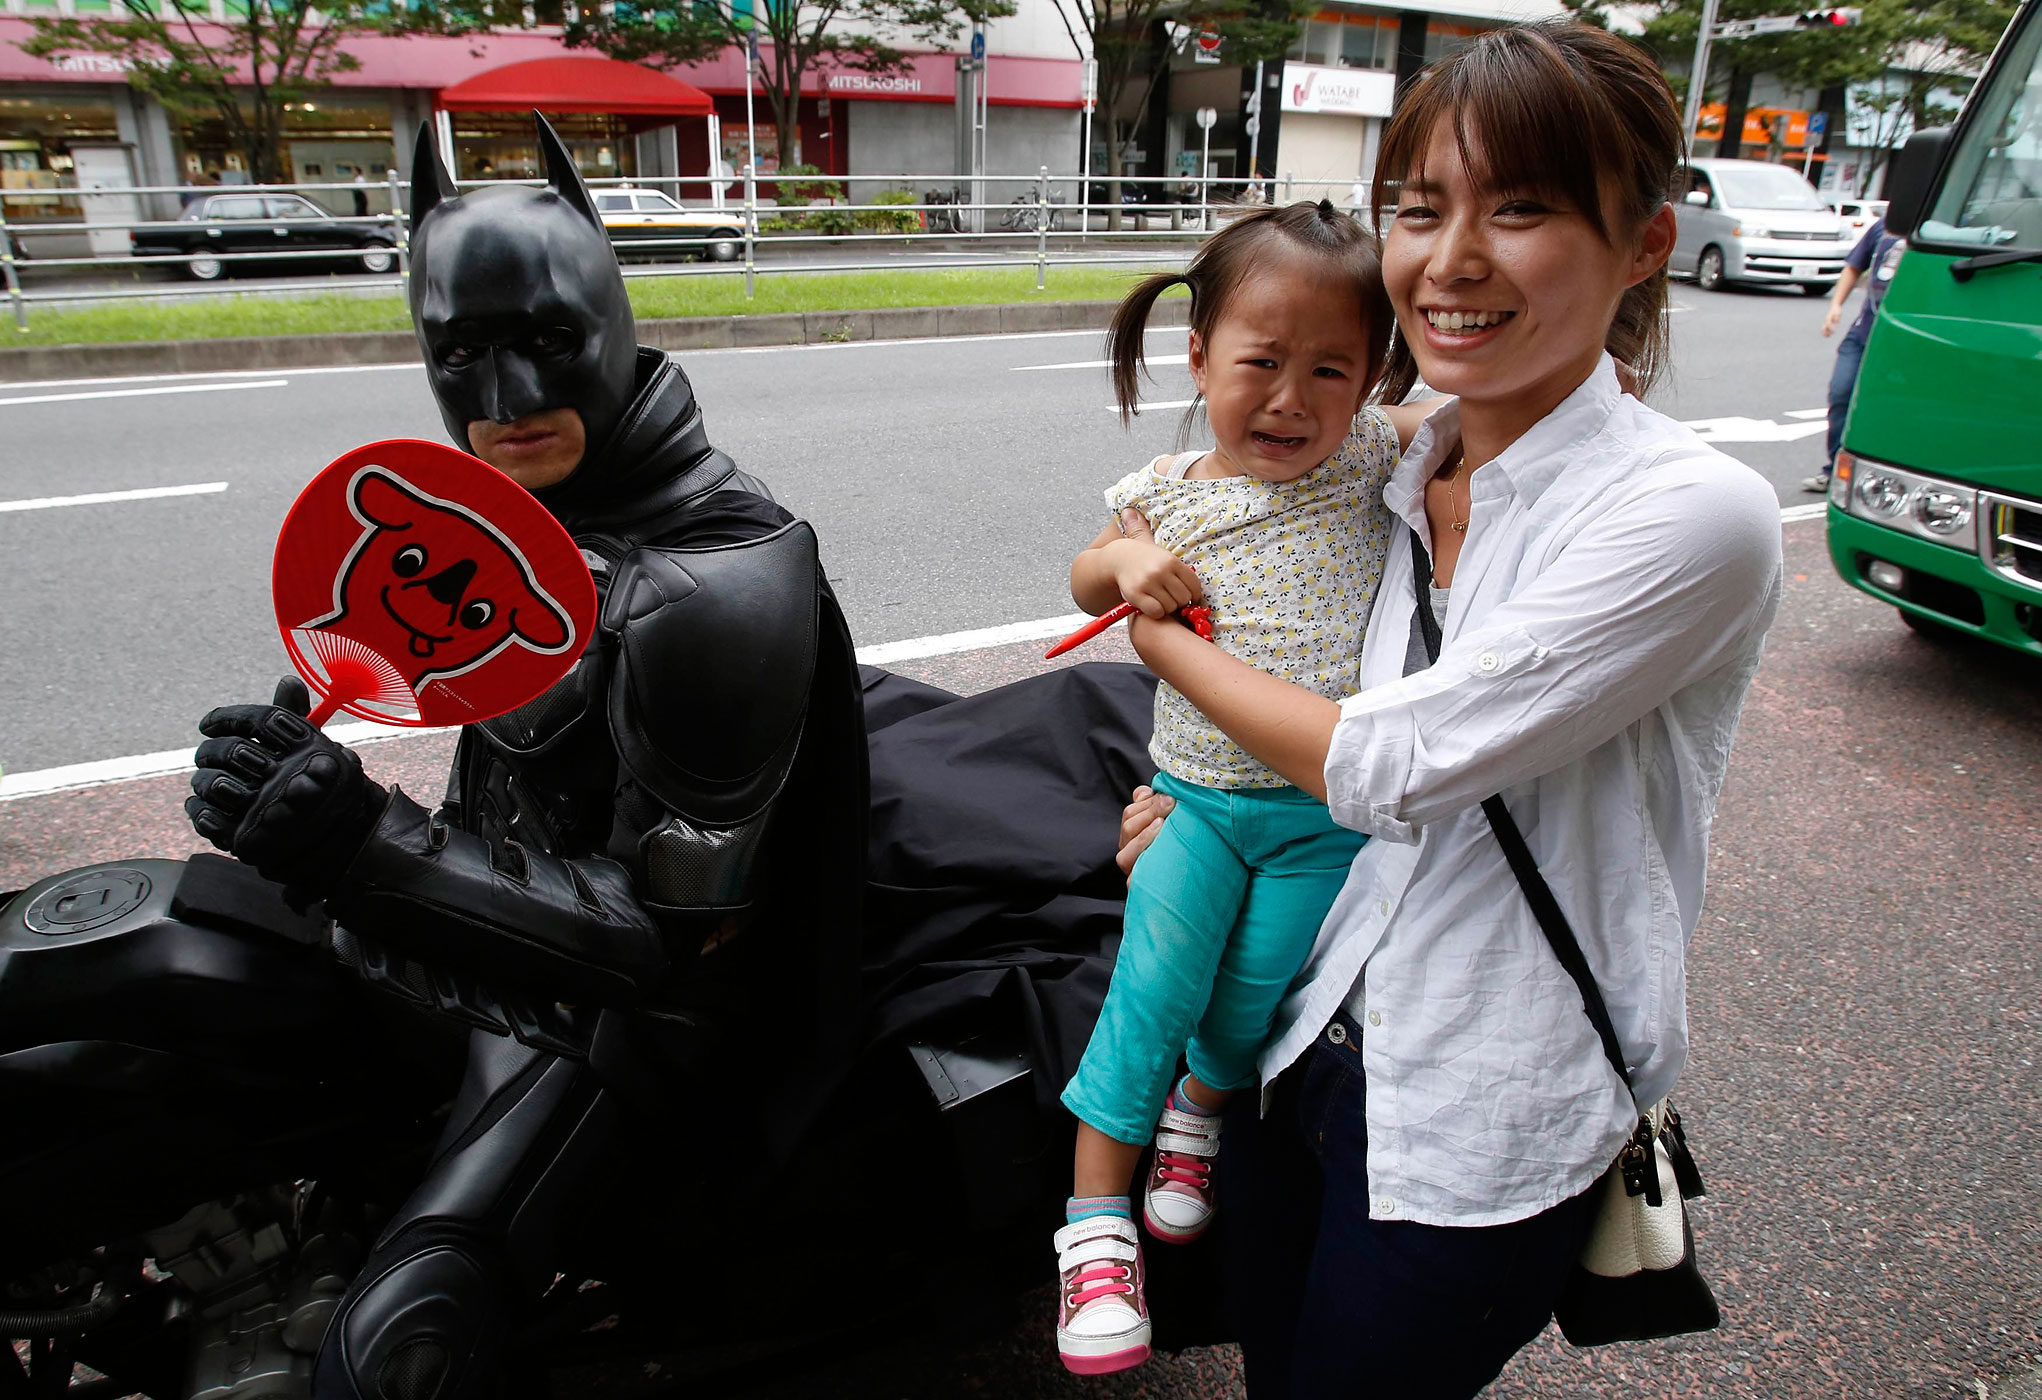 A woman carrying a crying child poses for pictures next to Chibatman.